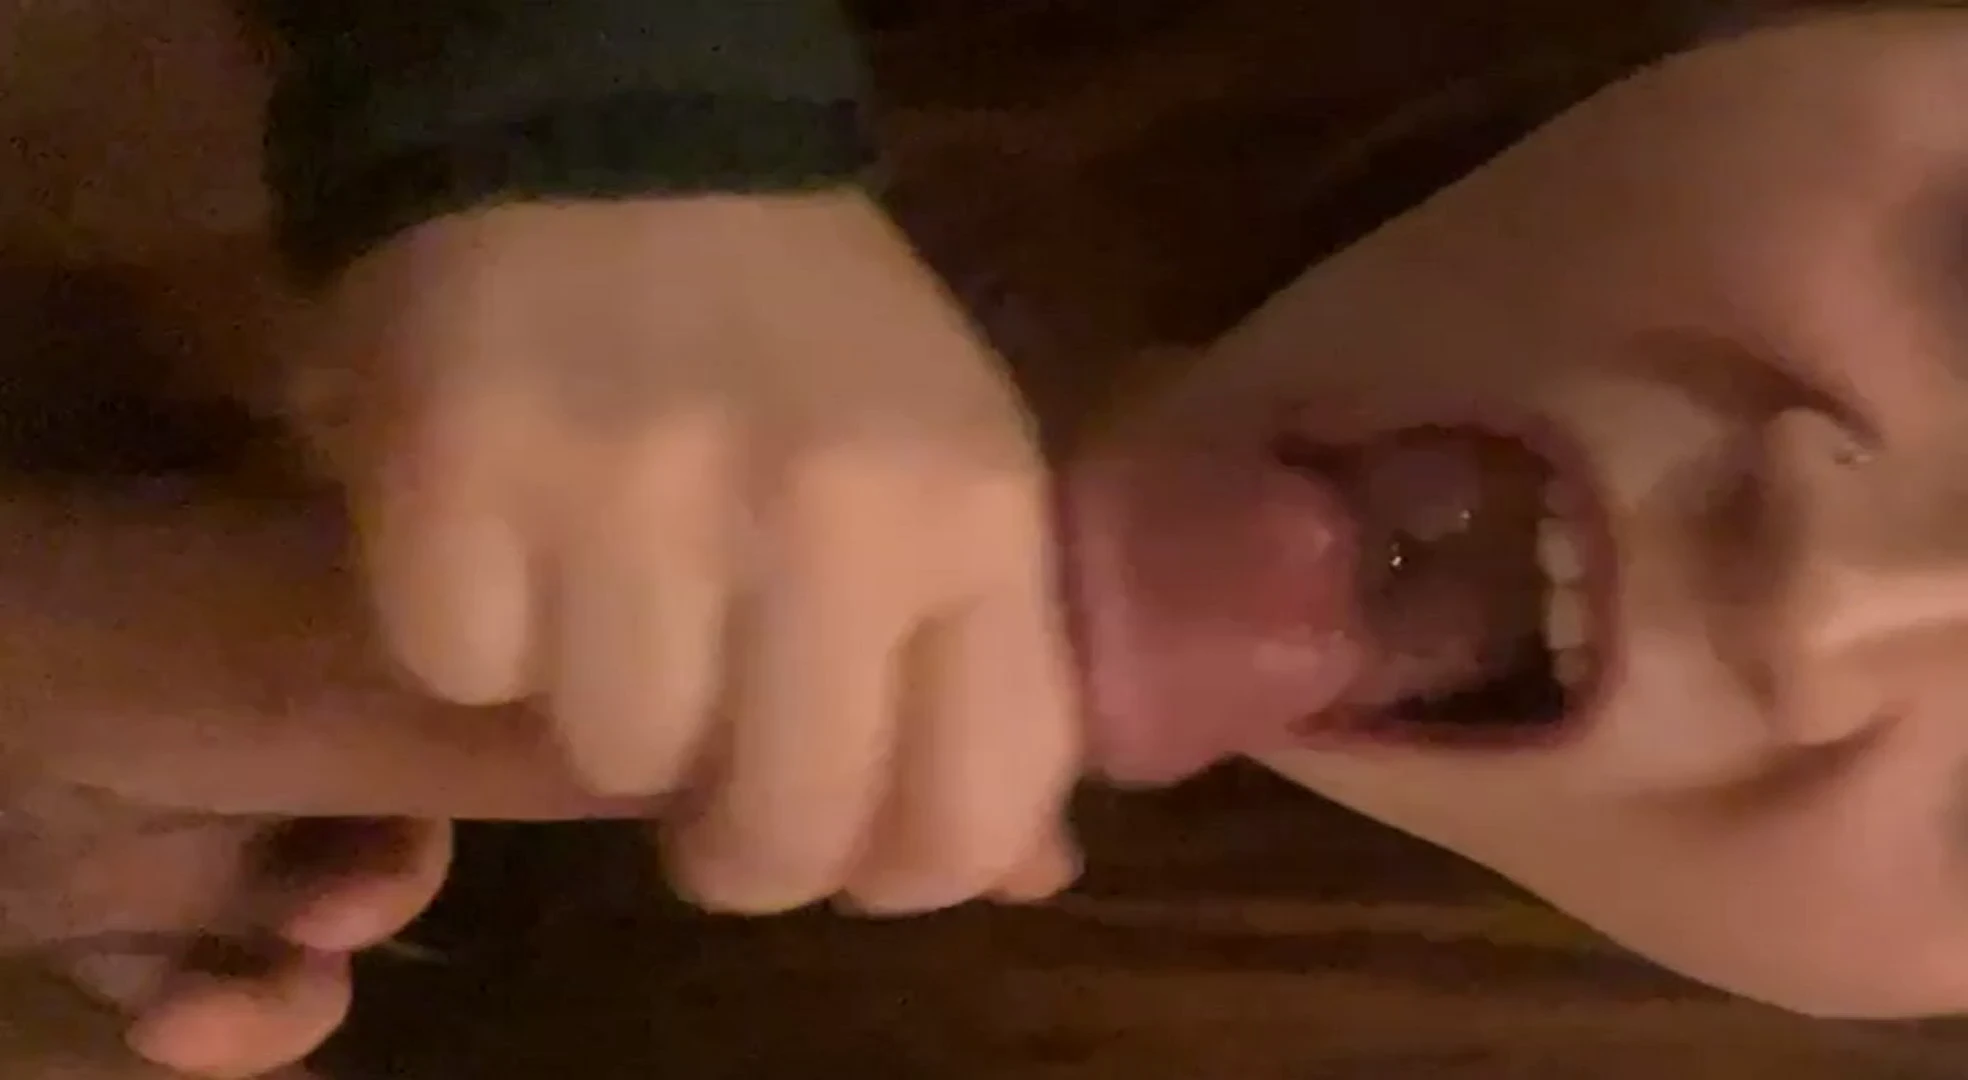 i wanted his cum so bad